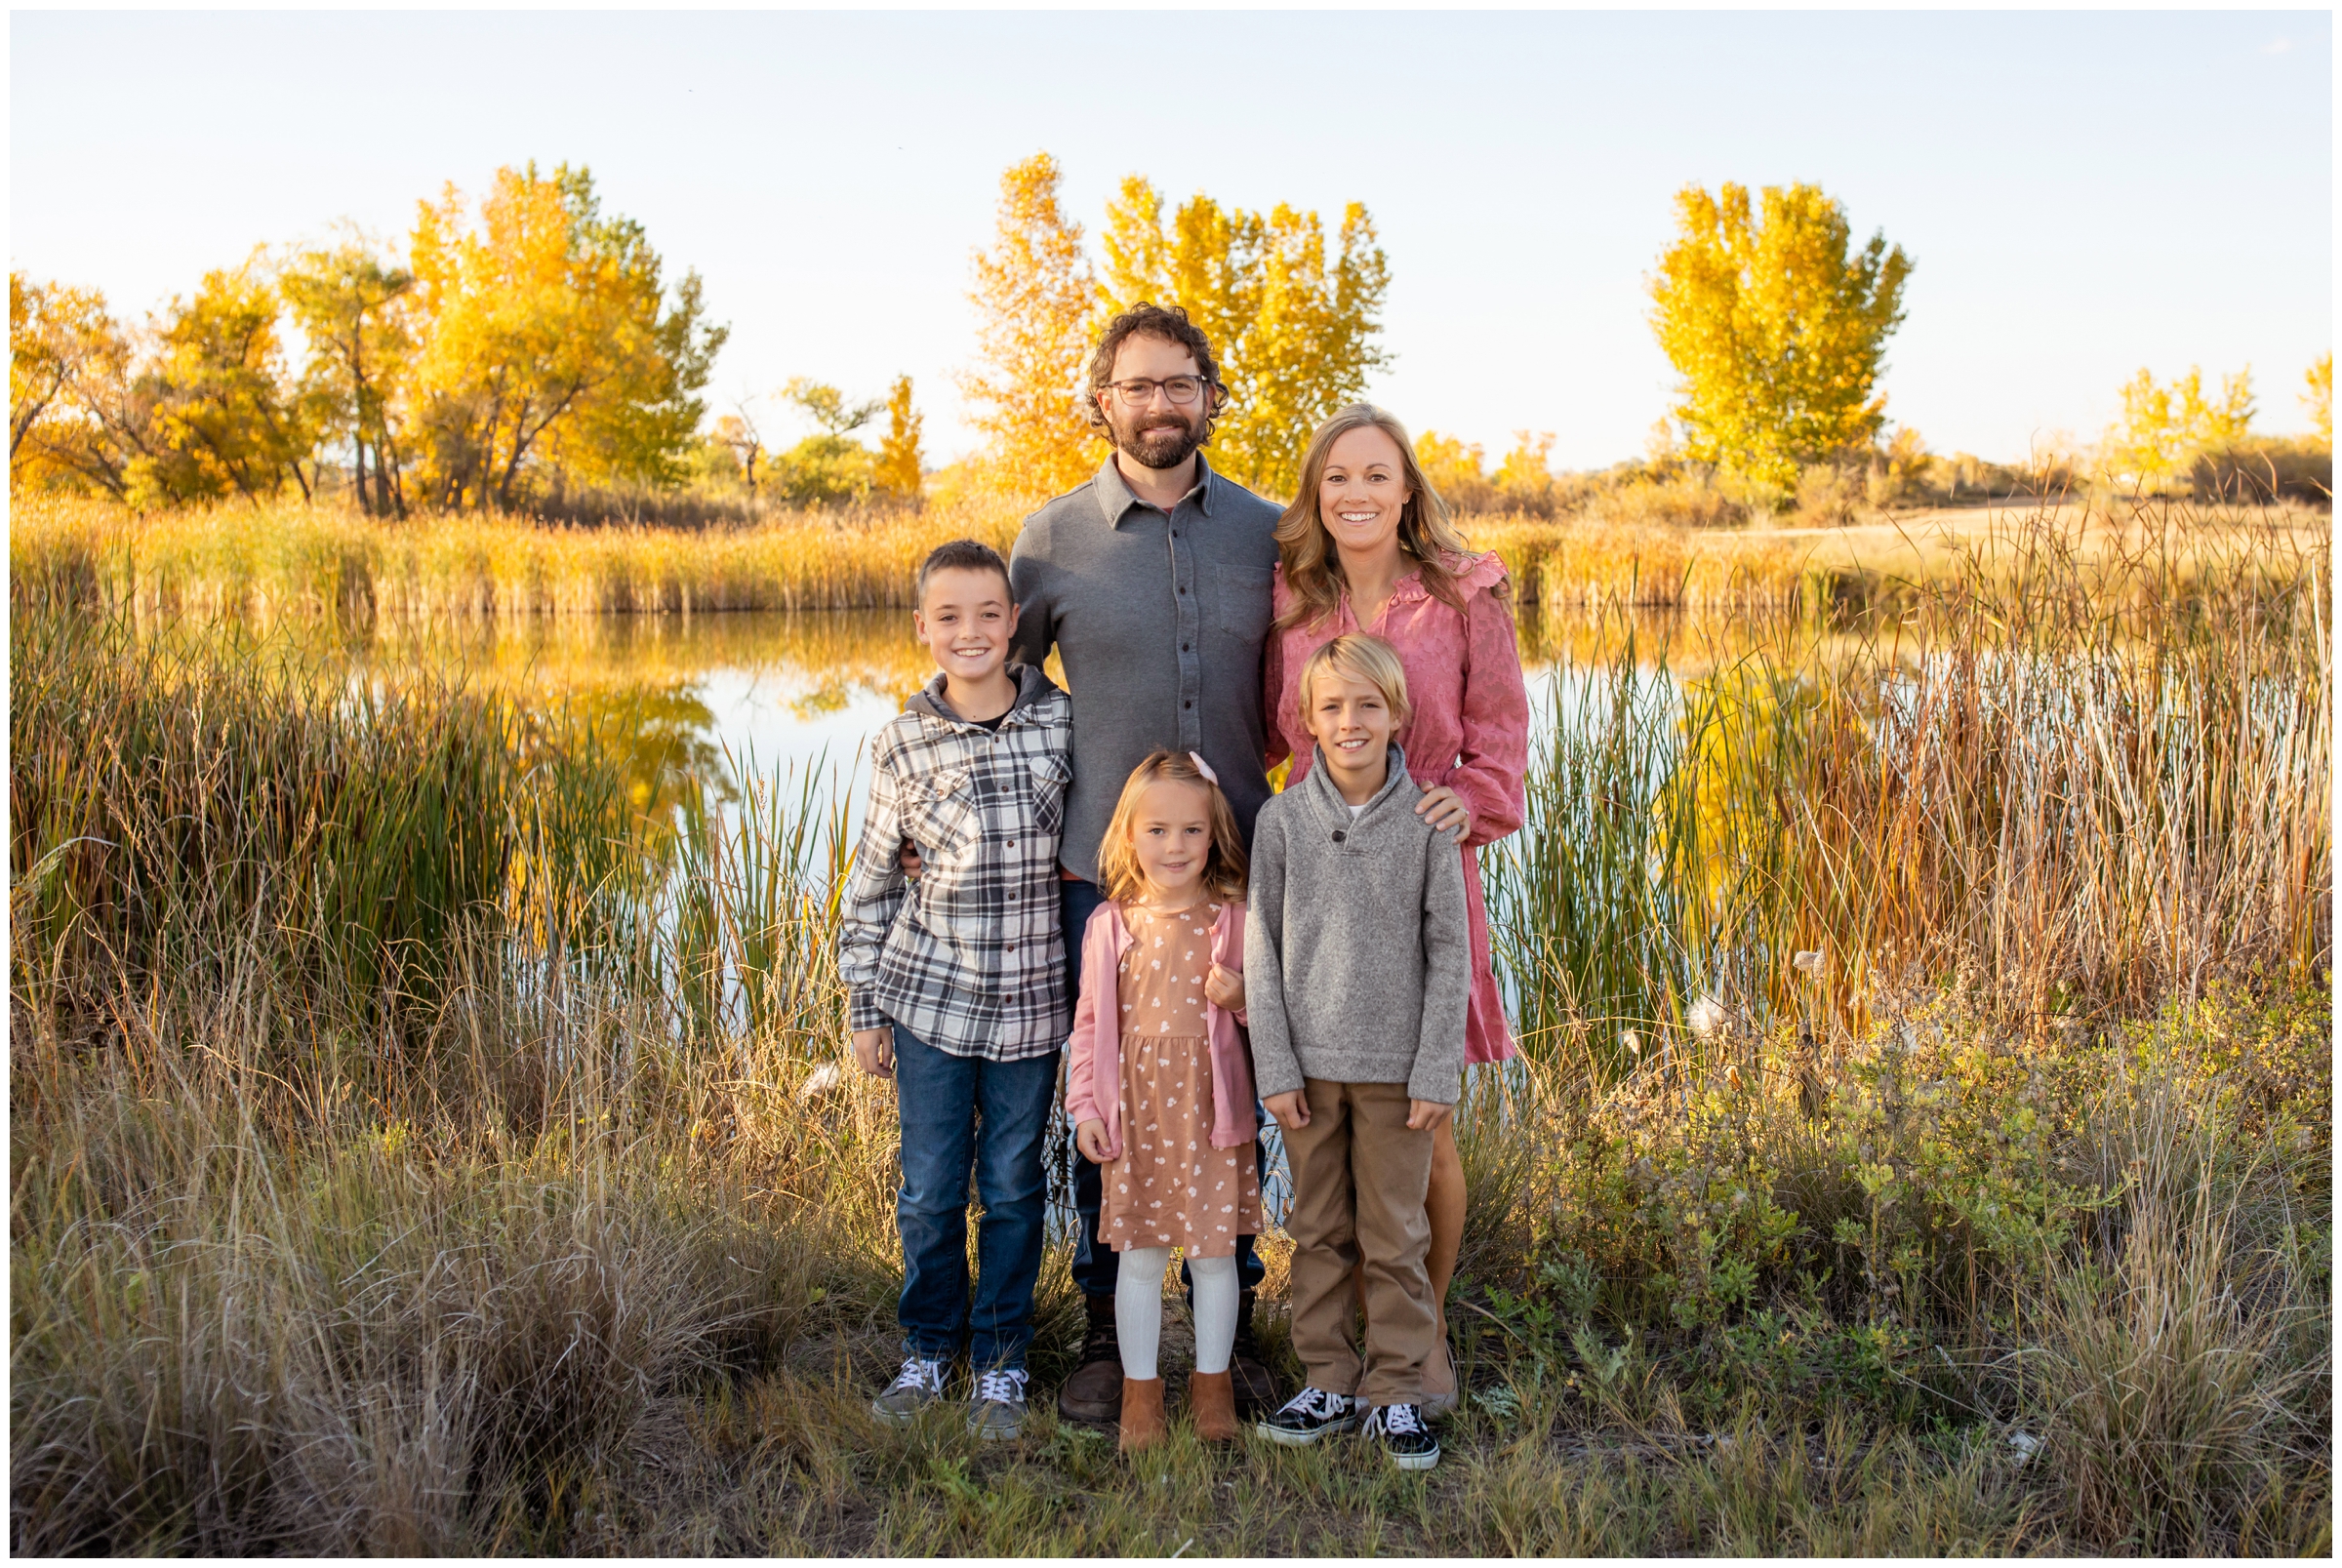 Colorado fall family photography session at Idaho Creek Park by Longmont portrait photographer Plum Pretty Photography 